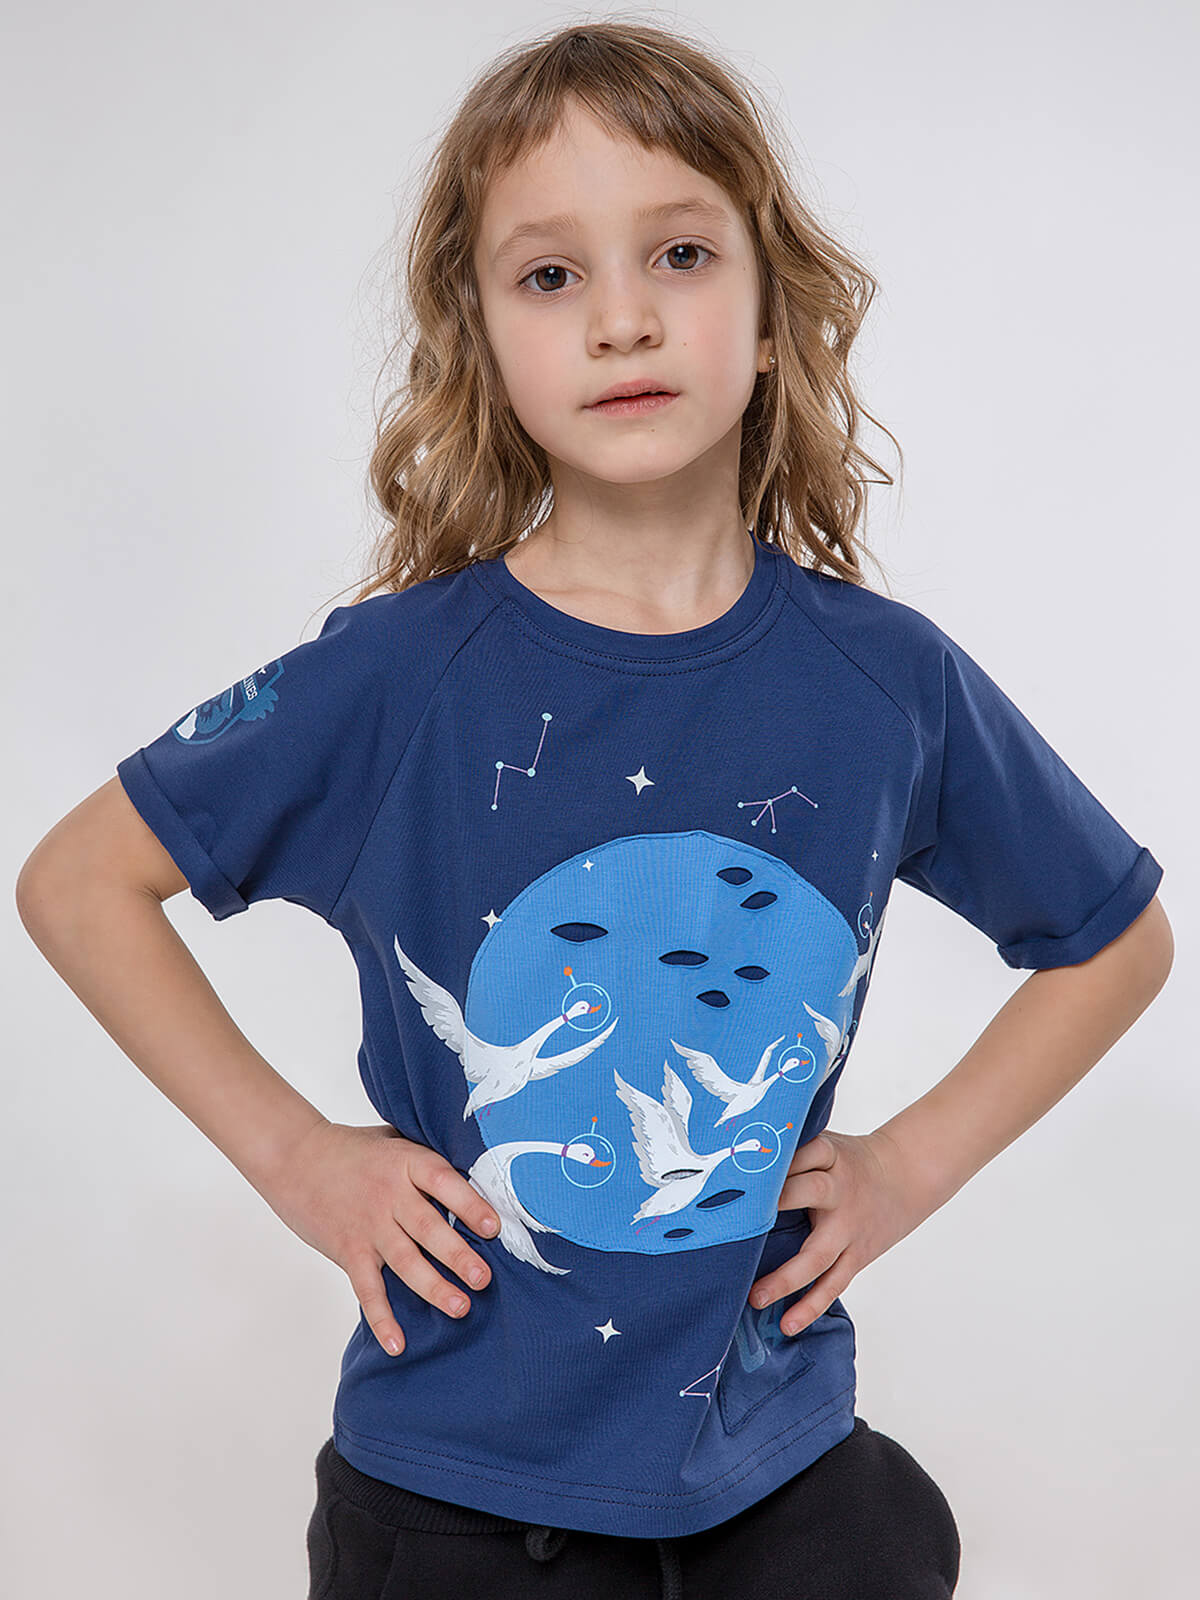 Kids T-Shirt Space. Color navy blue. T-shirt: unisex, well suited for both boys and girls.